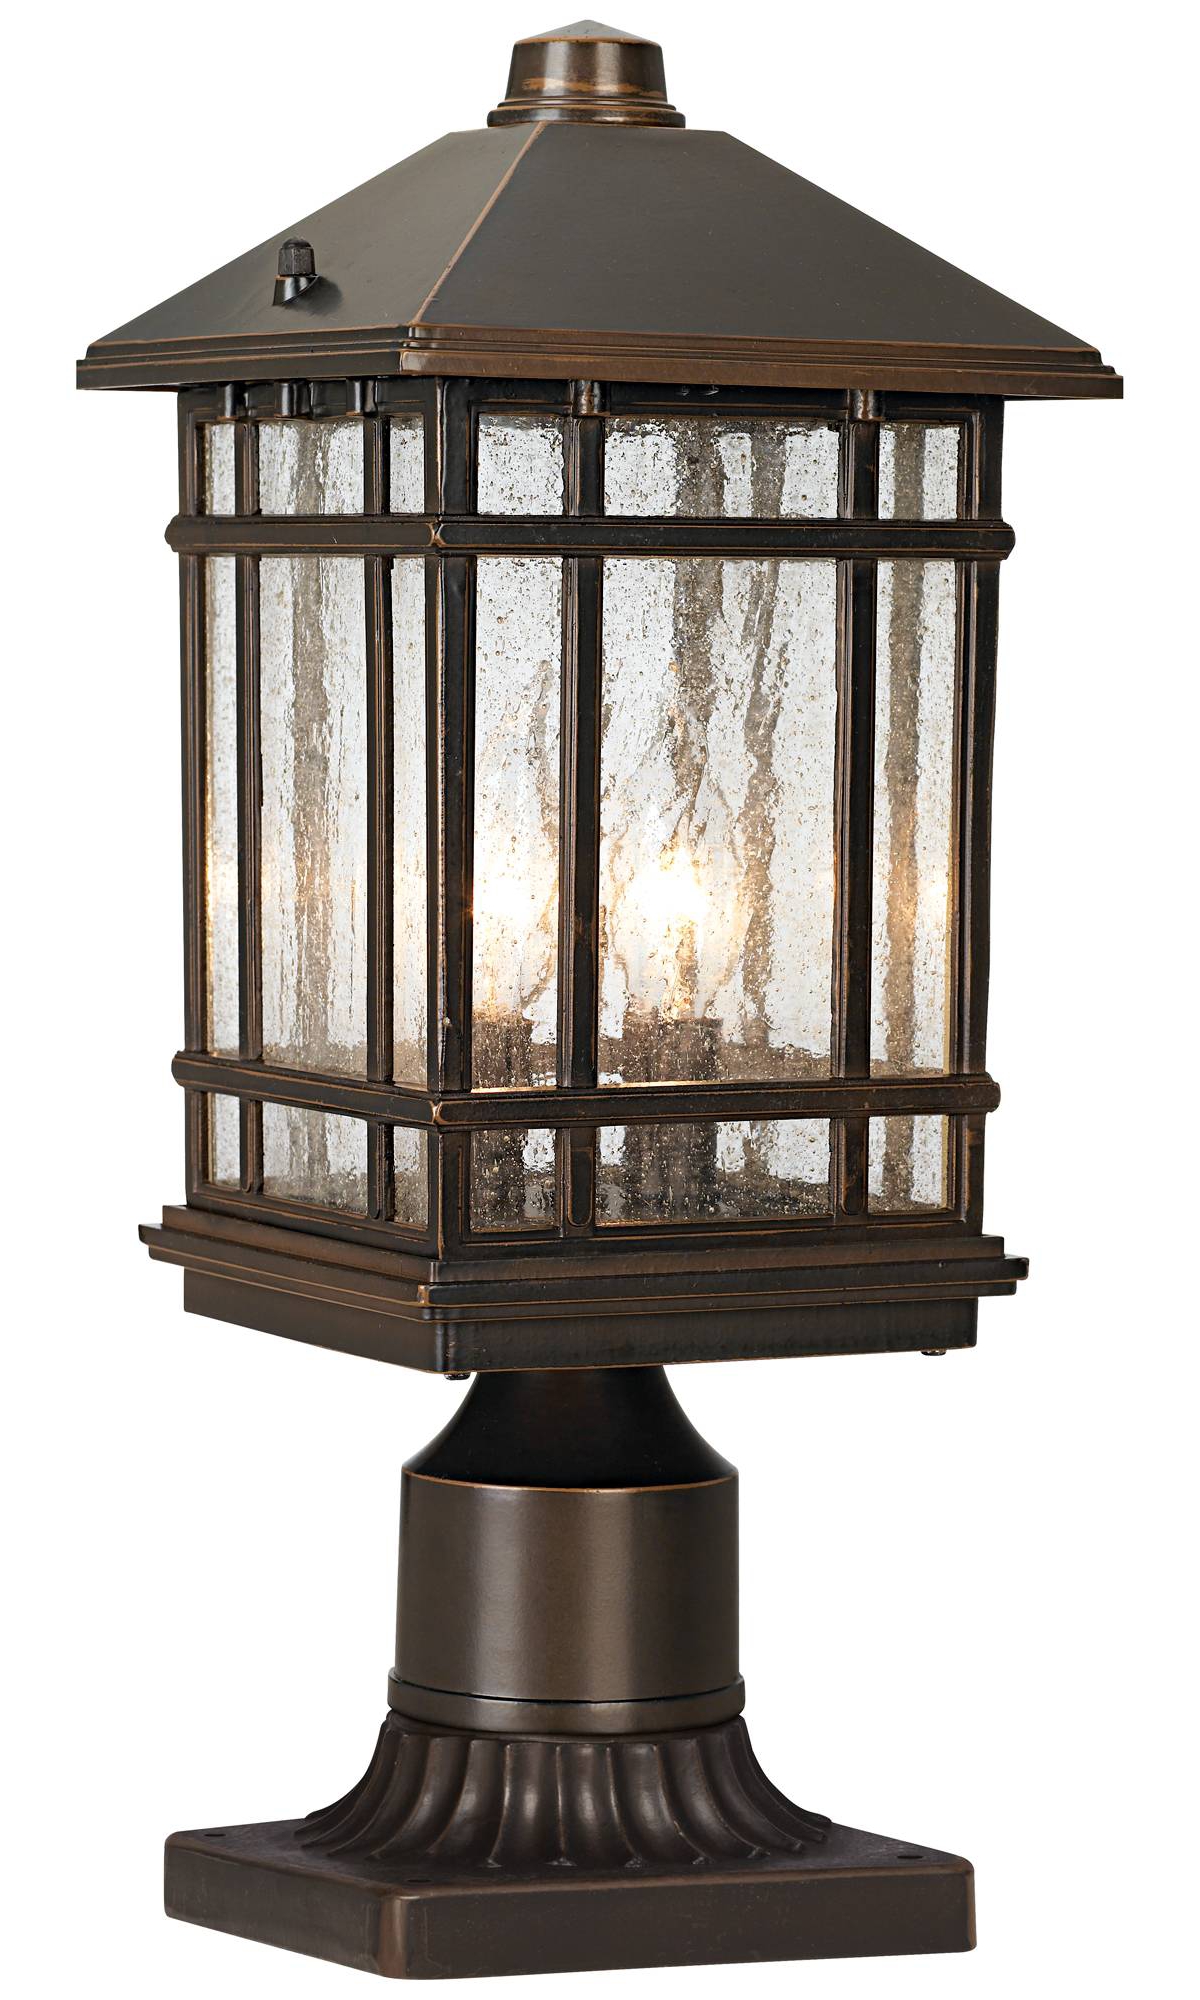 Sierra Craftsman Rustic Farmhouse Mission Outdoor Post Light Fixture Rubbed Bronze 2-Light 14" Seedy Glass for Exterior Barn Deck House Porch Patio Ou